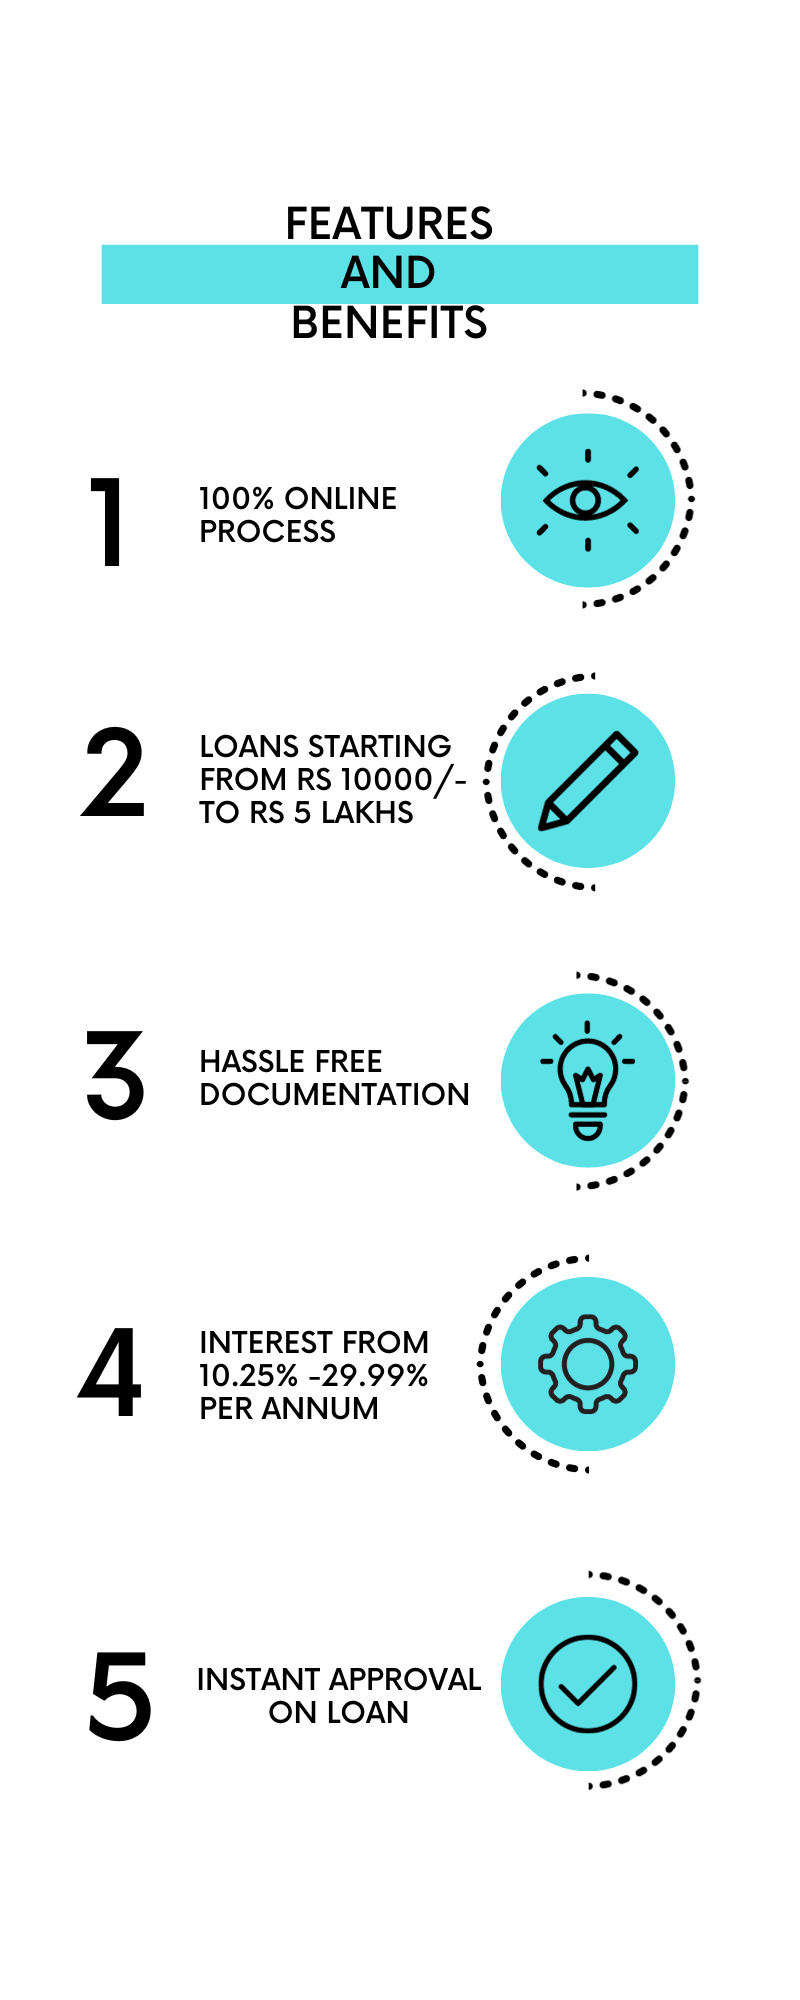 INDIALENDS INSTANT LOAN - FEATURES AND BENEFITS